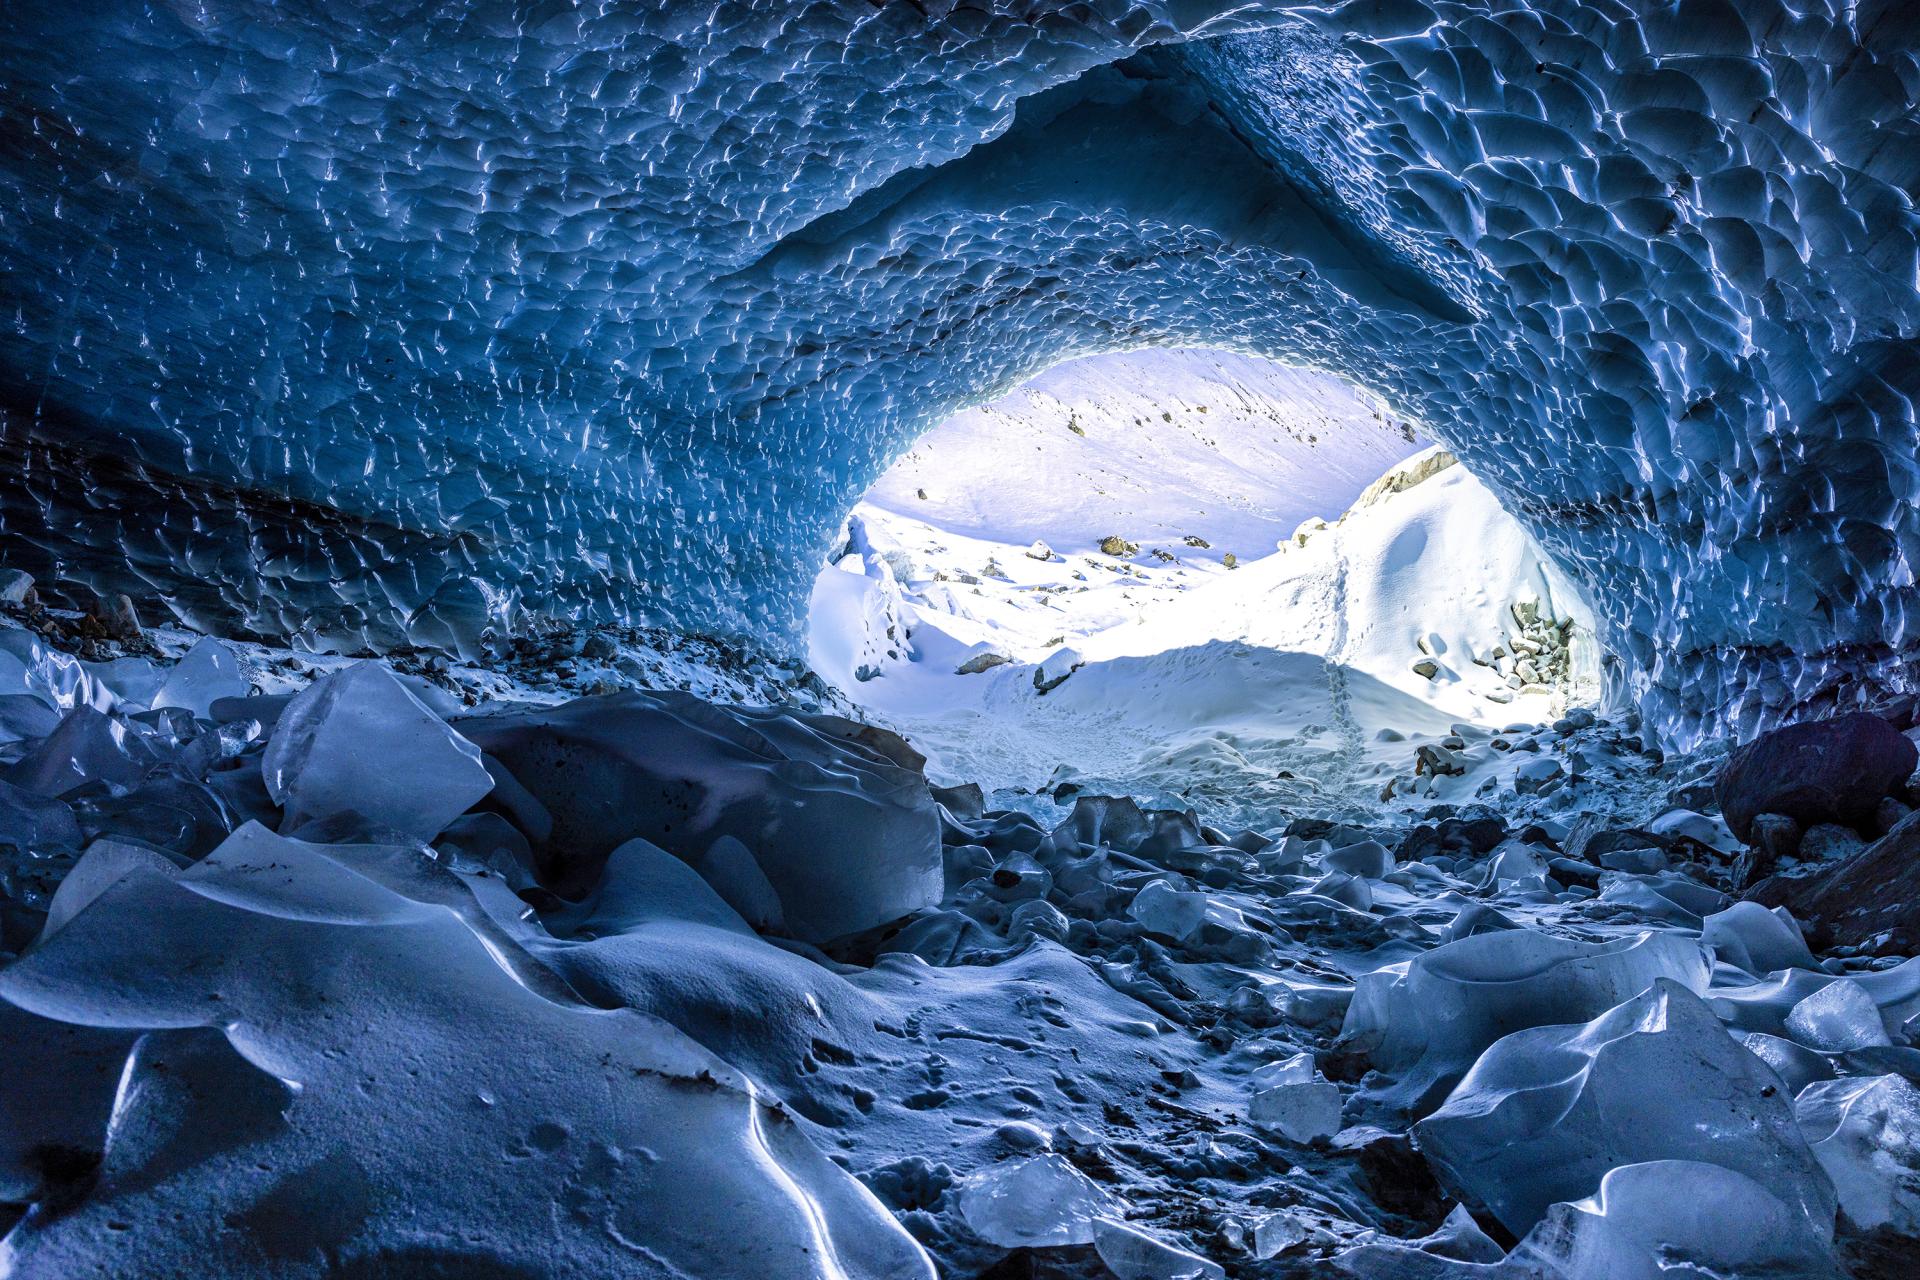 European Photography Awards Winner - the Ice cave